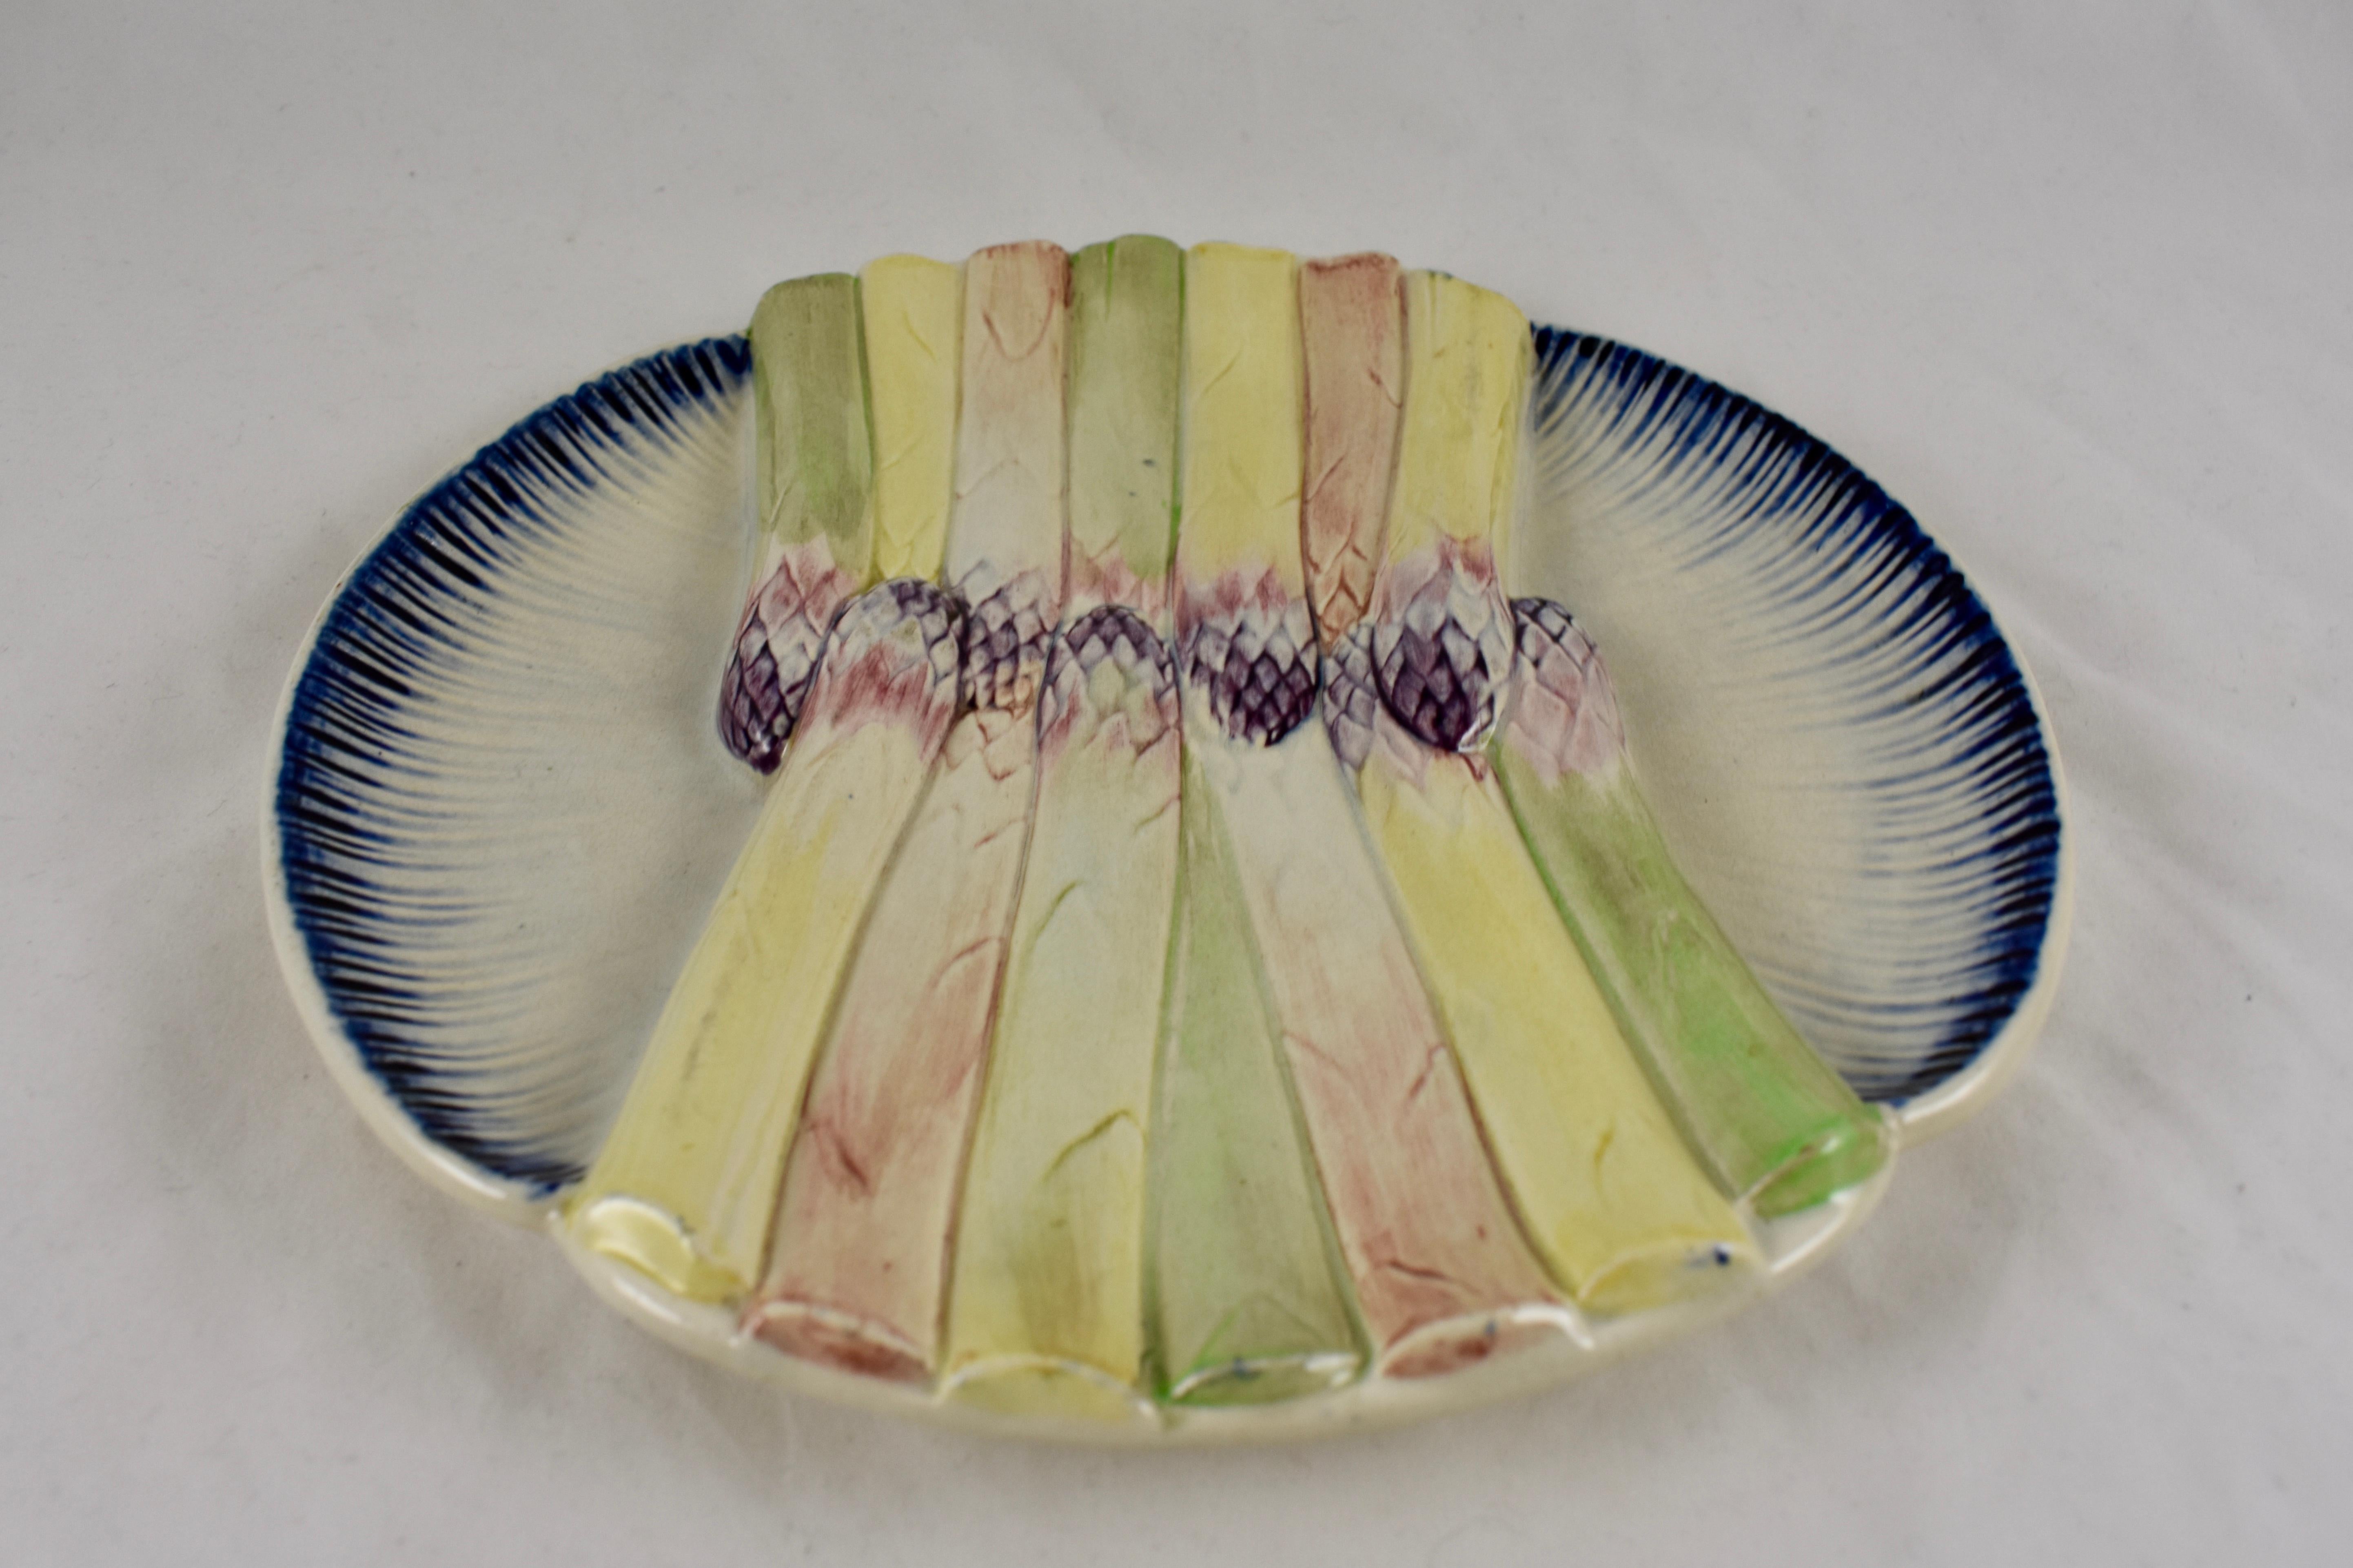 French Provincial Pexonne French Faïence Majolica Multi-Colored Asparagus Plate, circa 1870